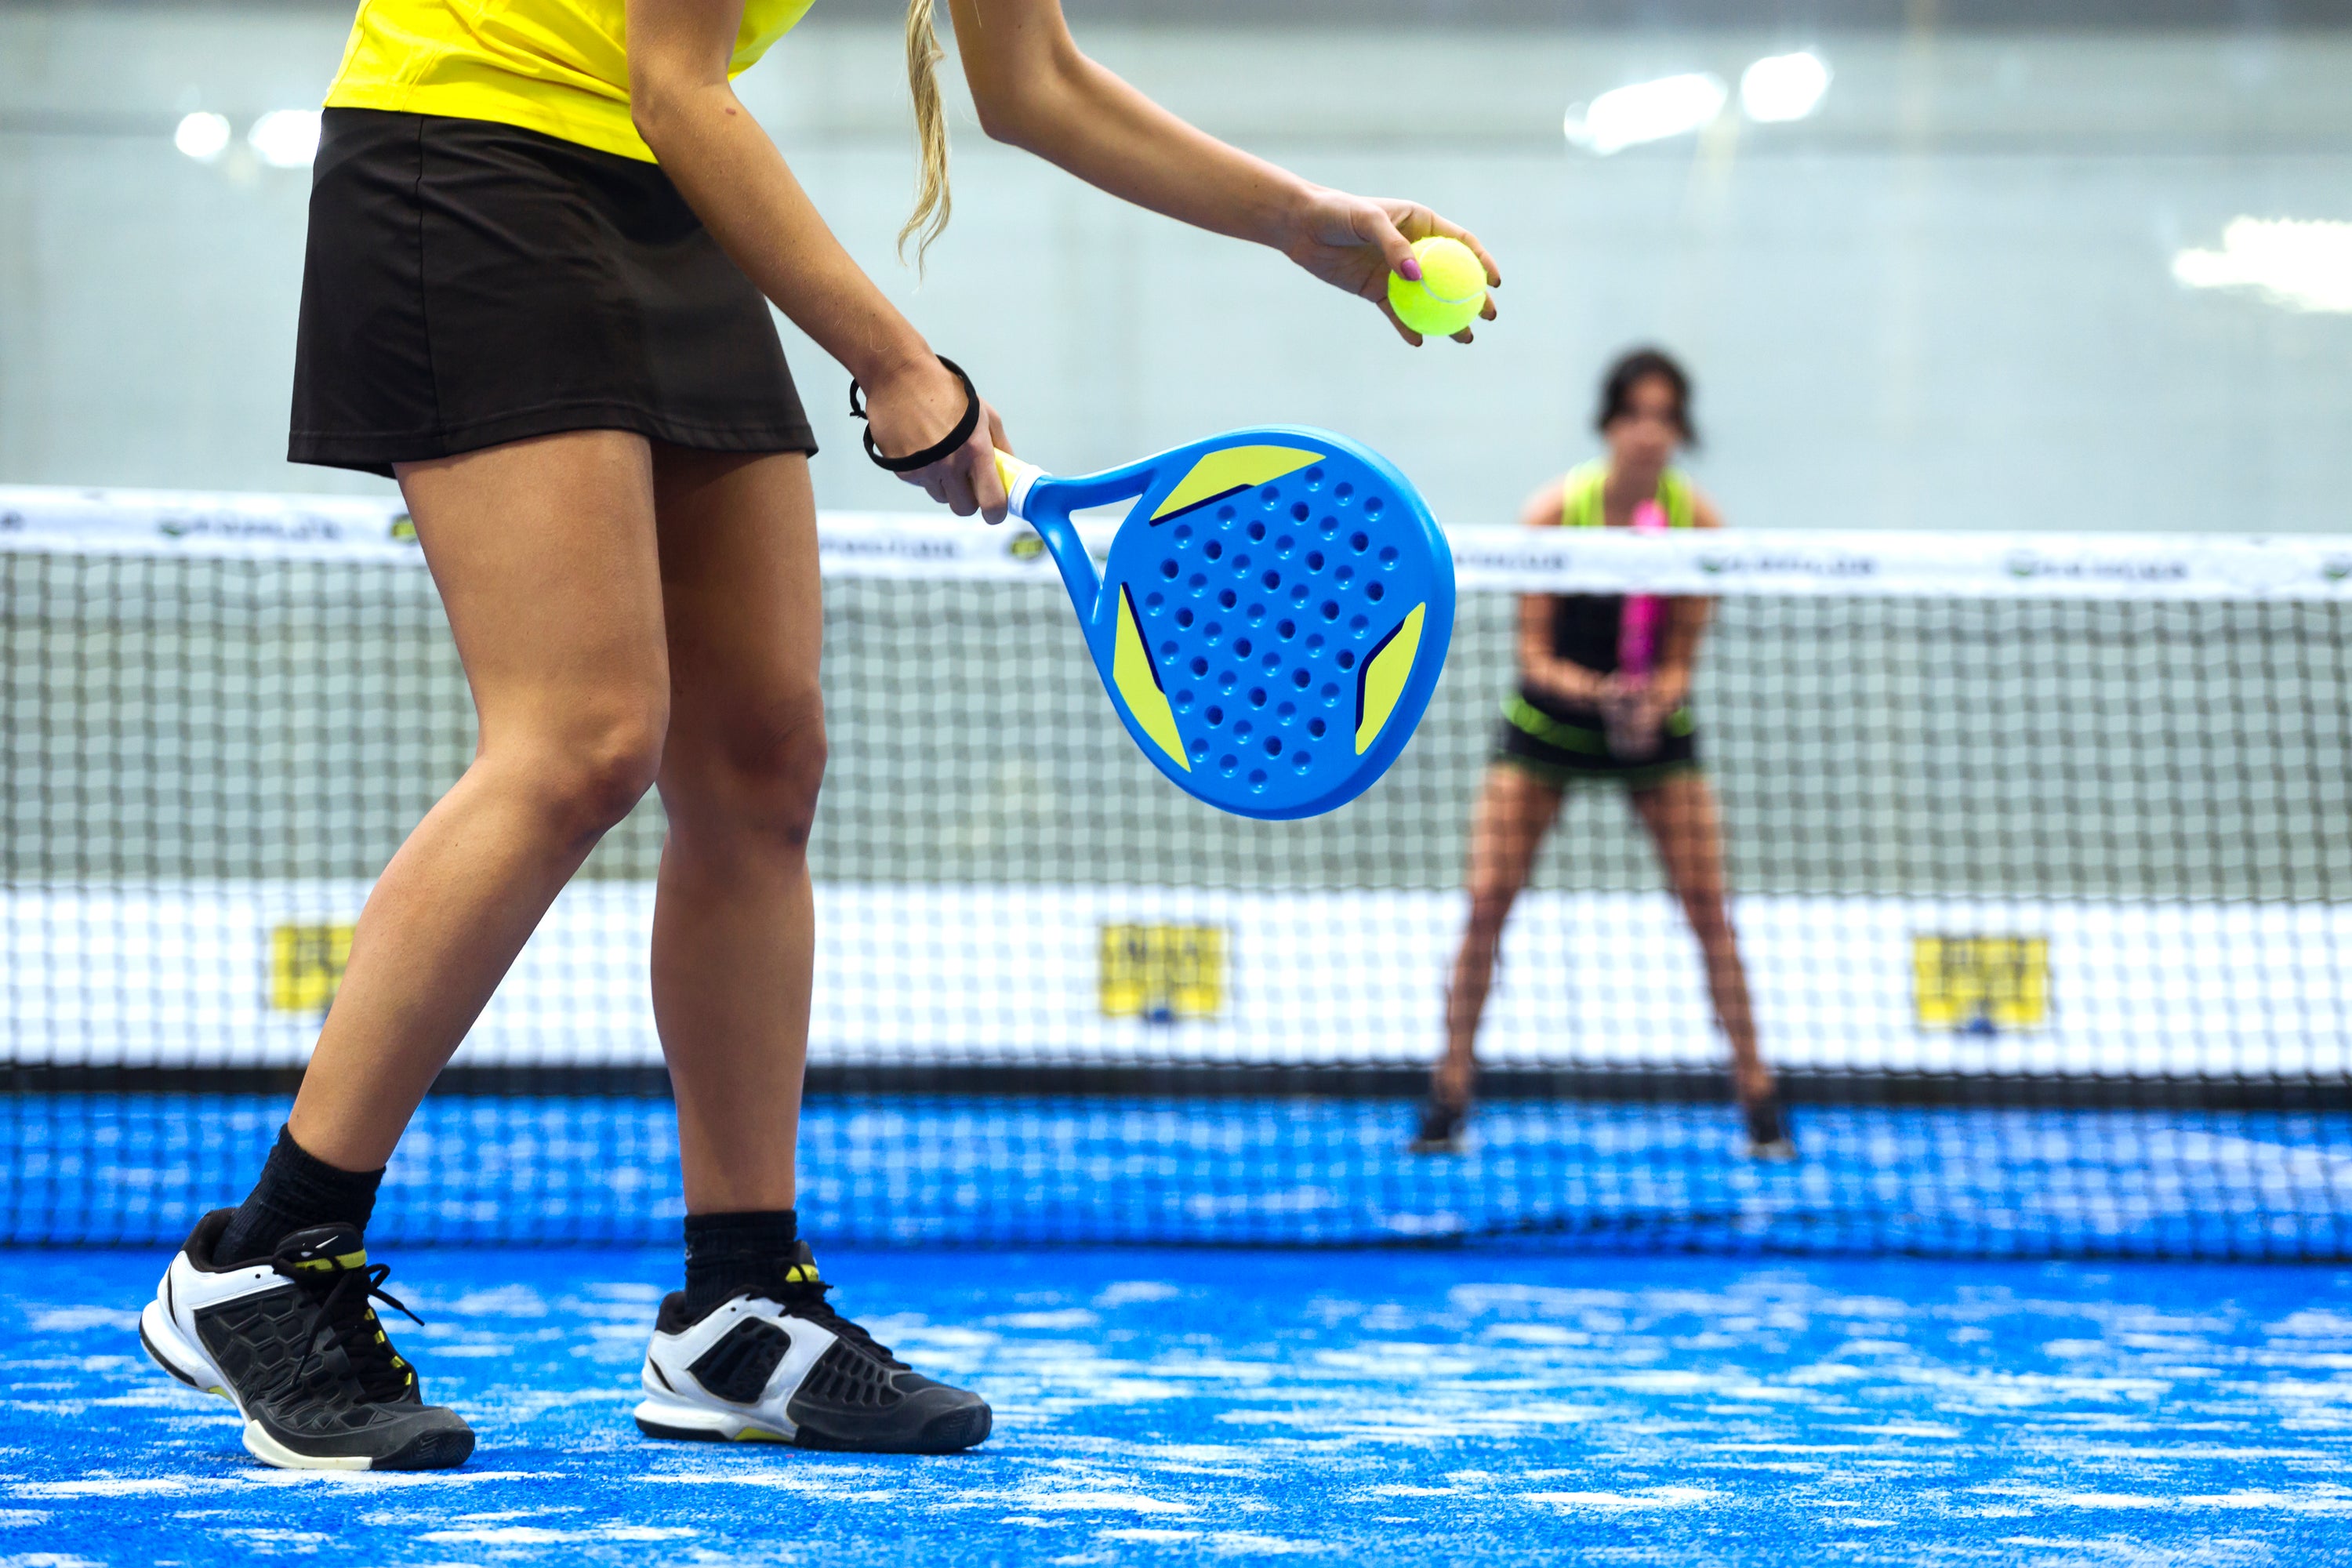 Padel is the next big thing in american sports, available at Racquet Point